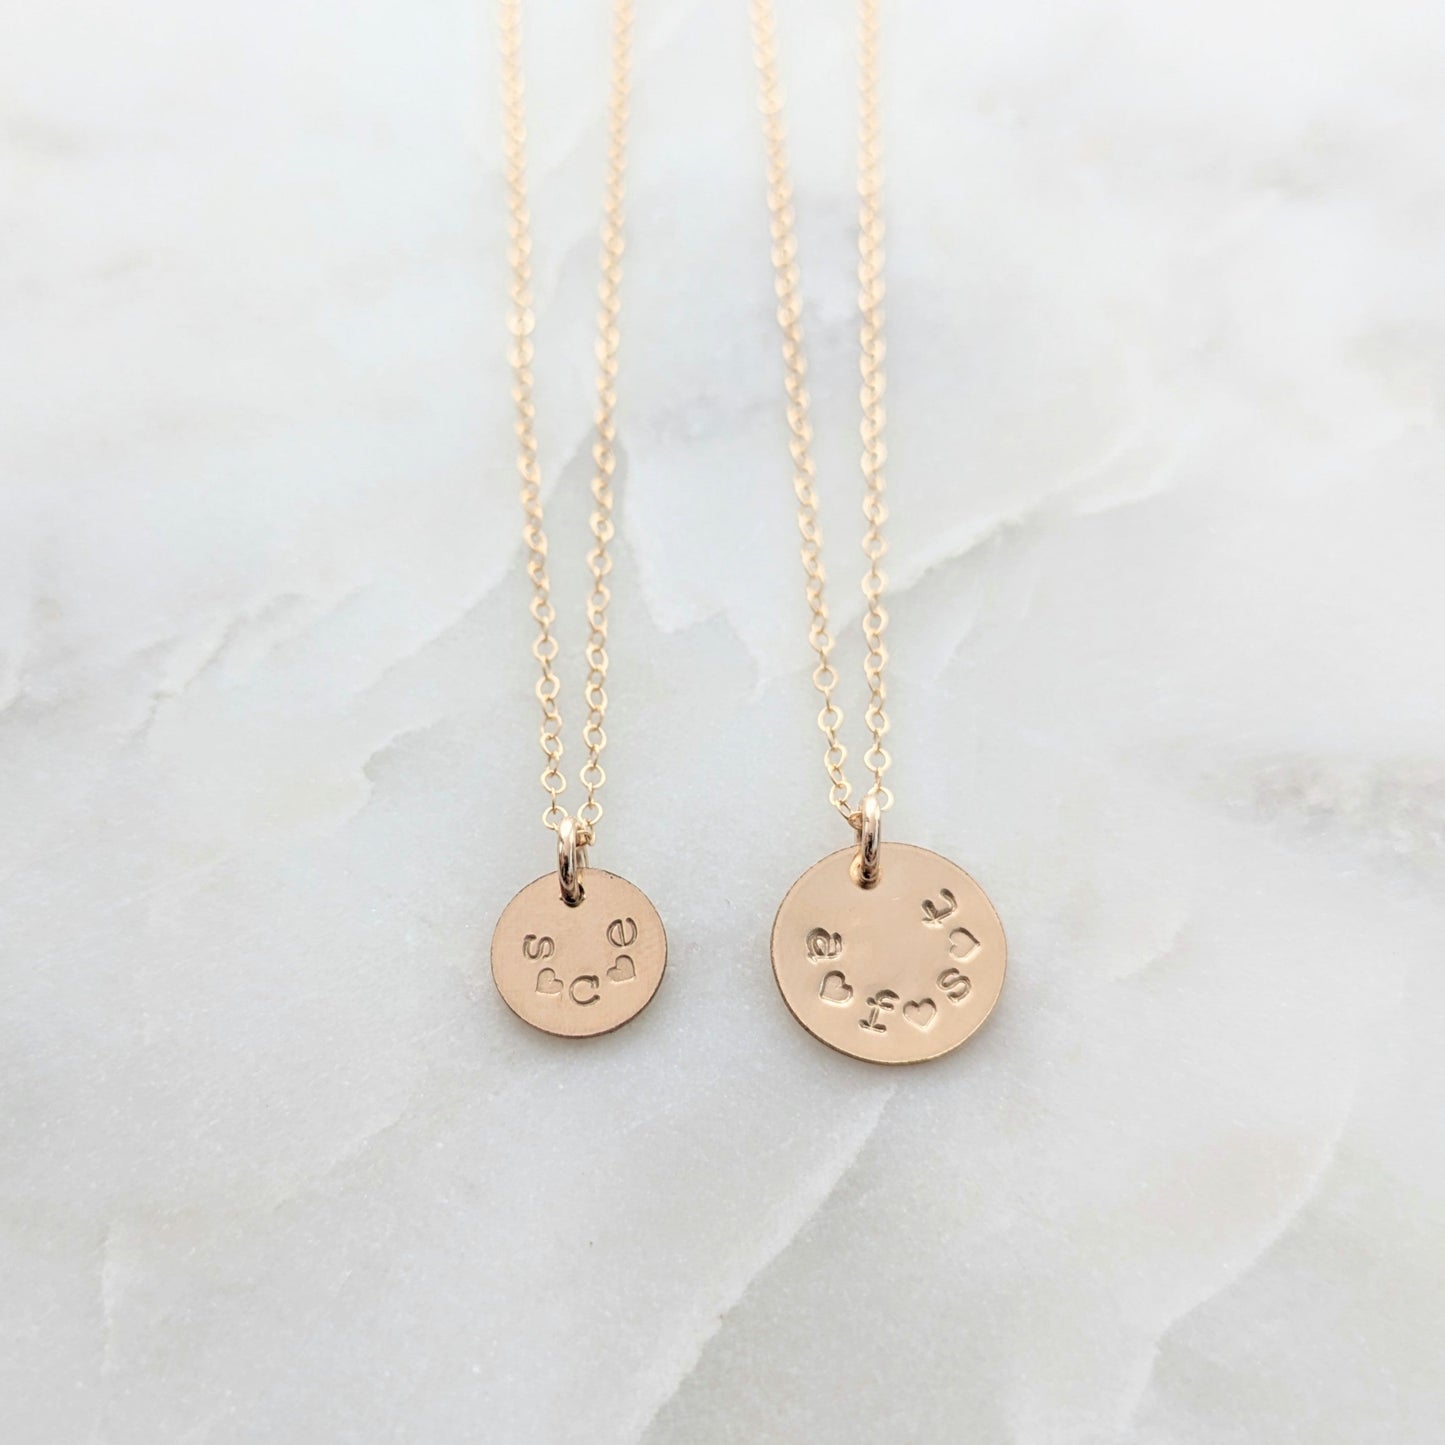 Multiple Initial Charm Necklace, Gold or Sterling Silver